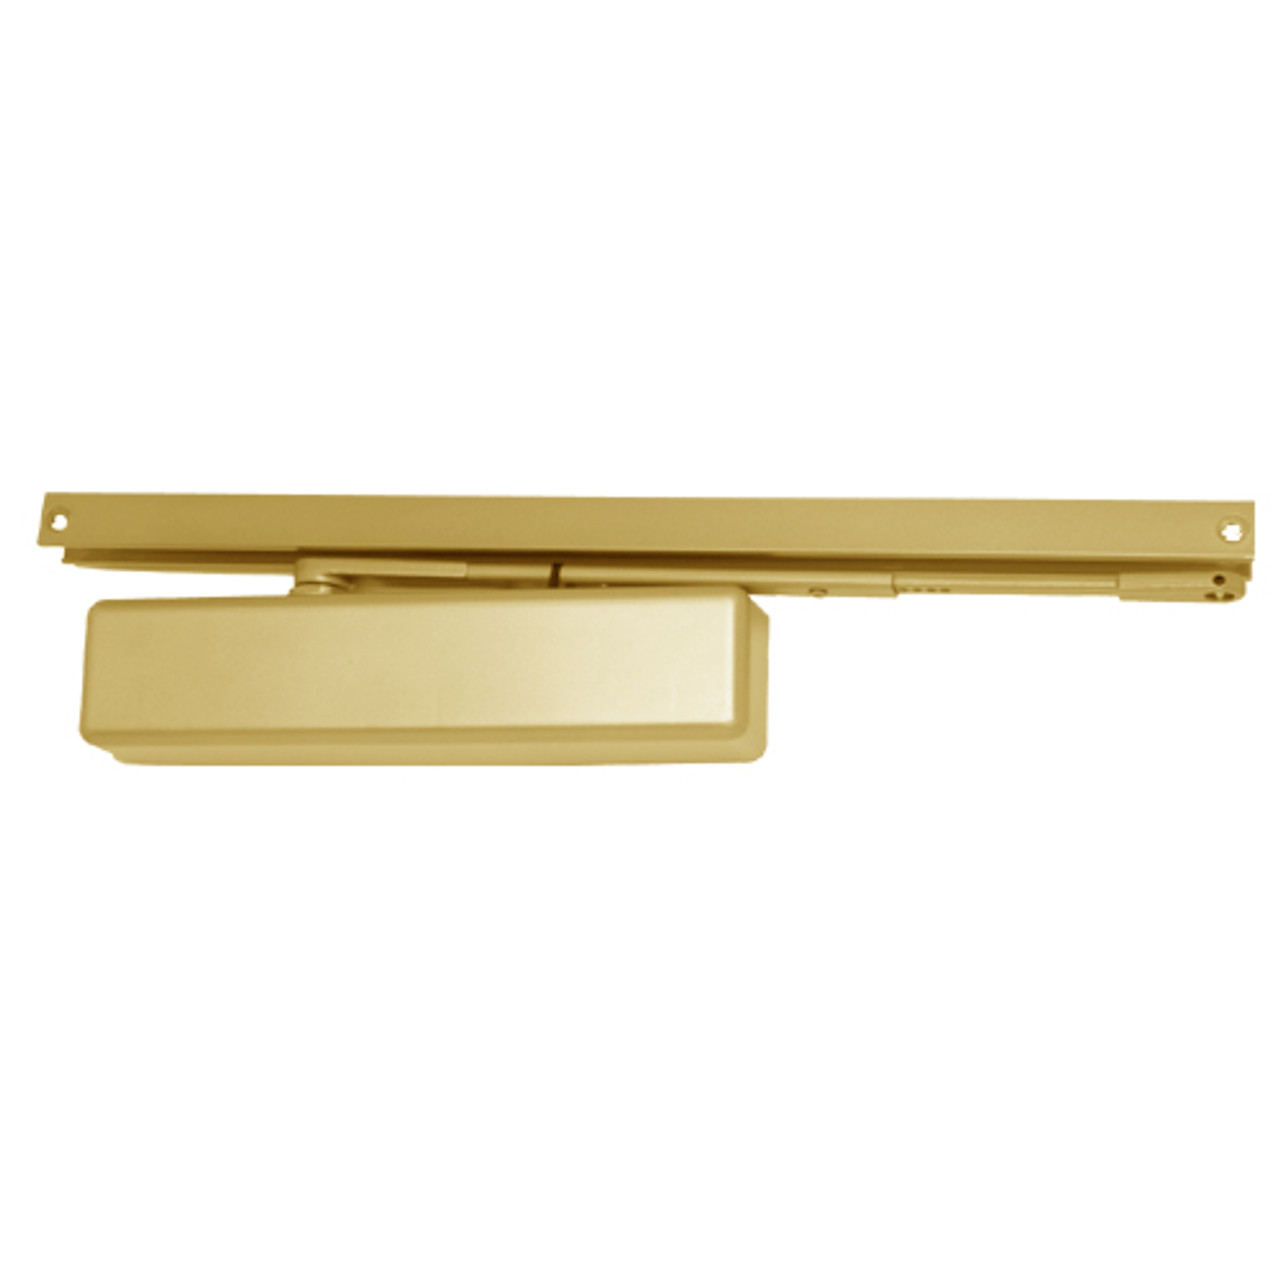 1460T-H-BUMPER-US3 LCN Surface Mount Door Closer with Hold Open Track with Bumper in Bright Brass Finish